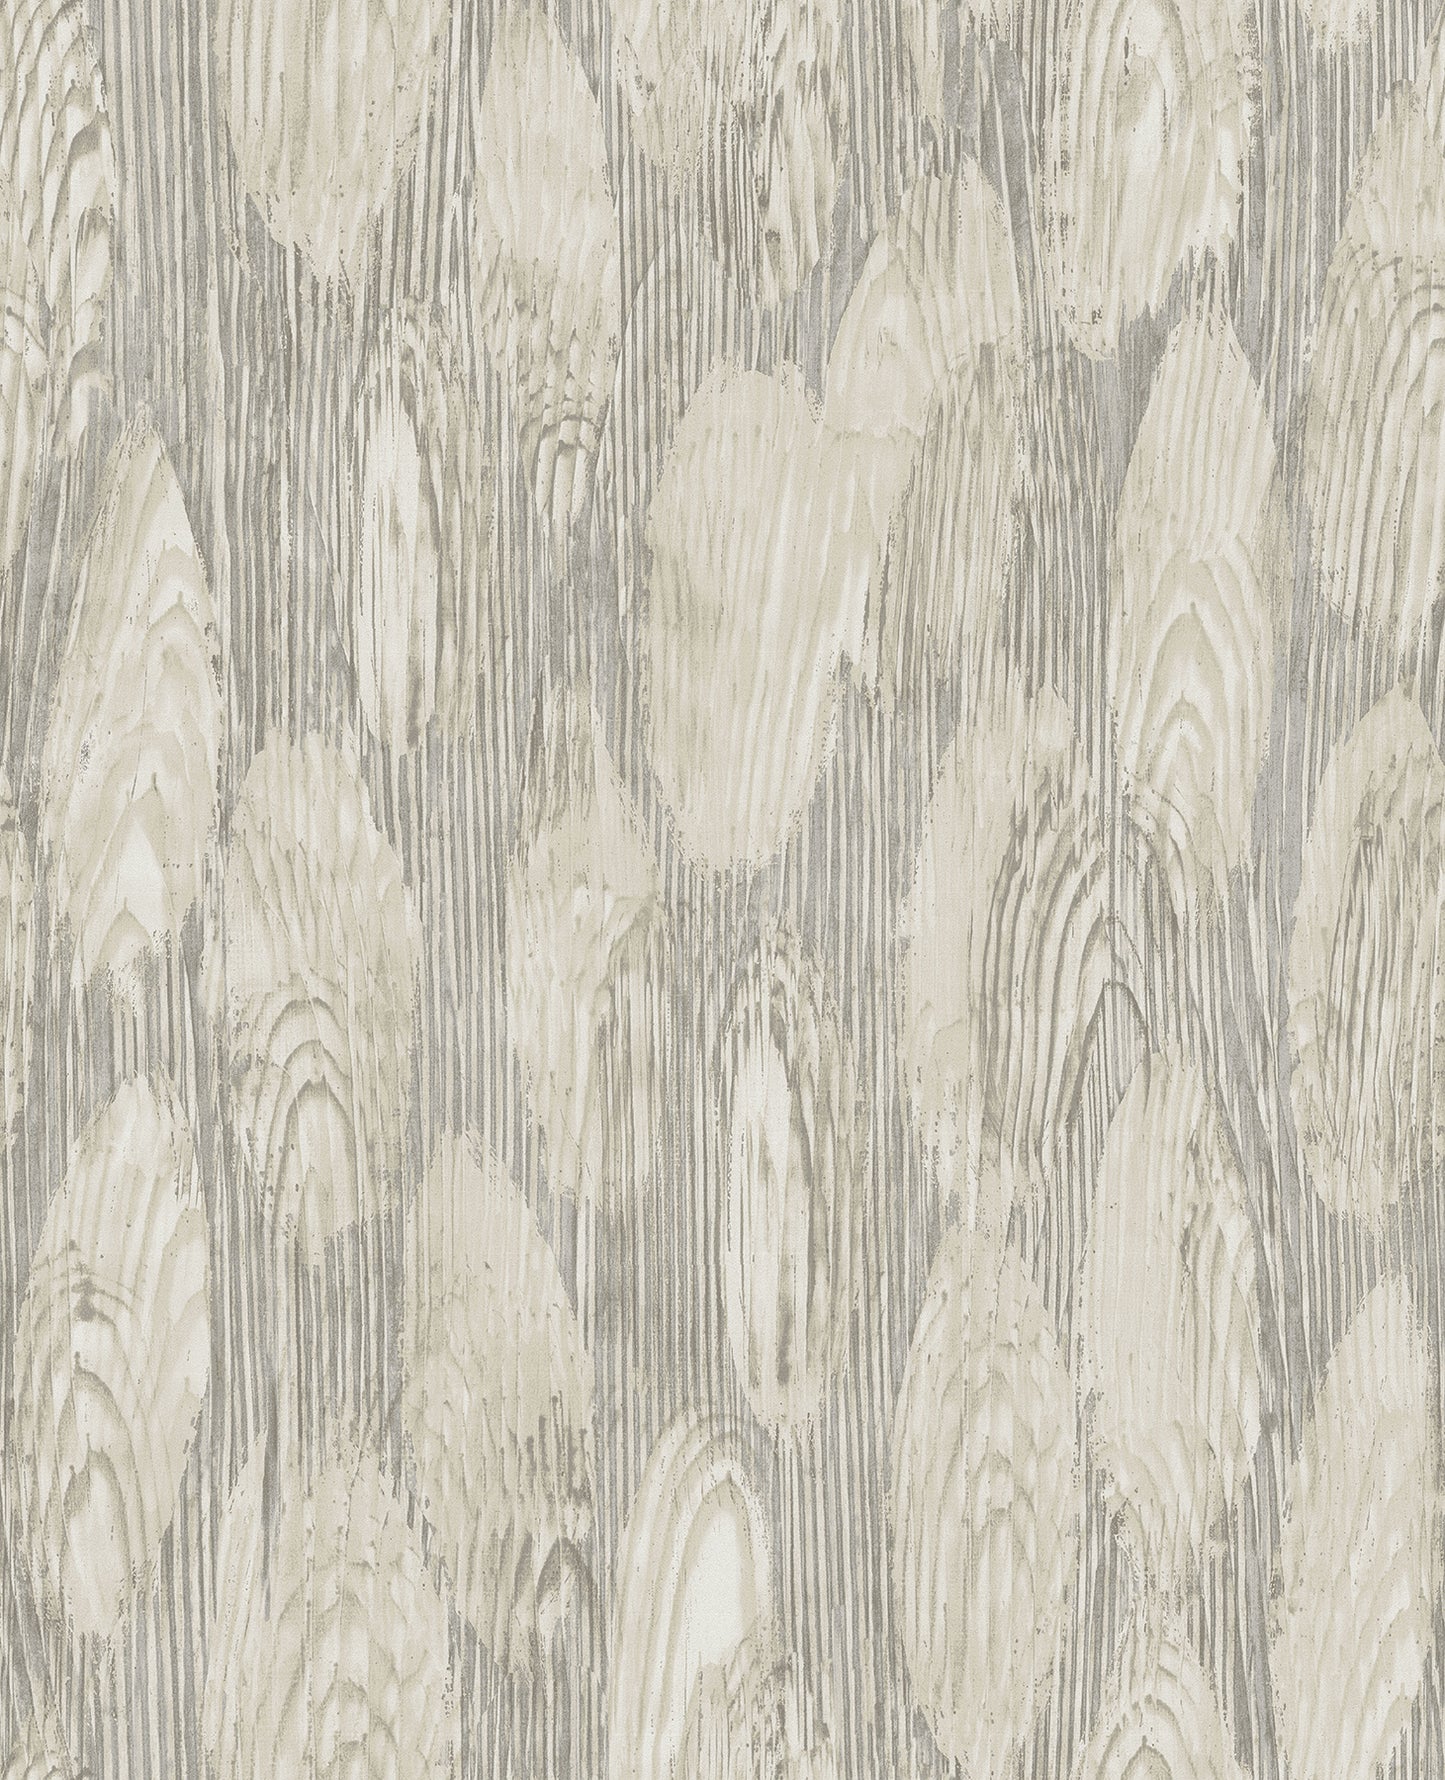 Find 2908 87118 Alchemy Monolith Grey Abstract Wood A Street Prints Wallpaper